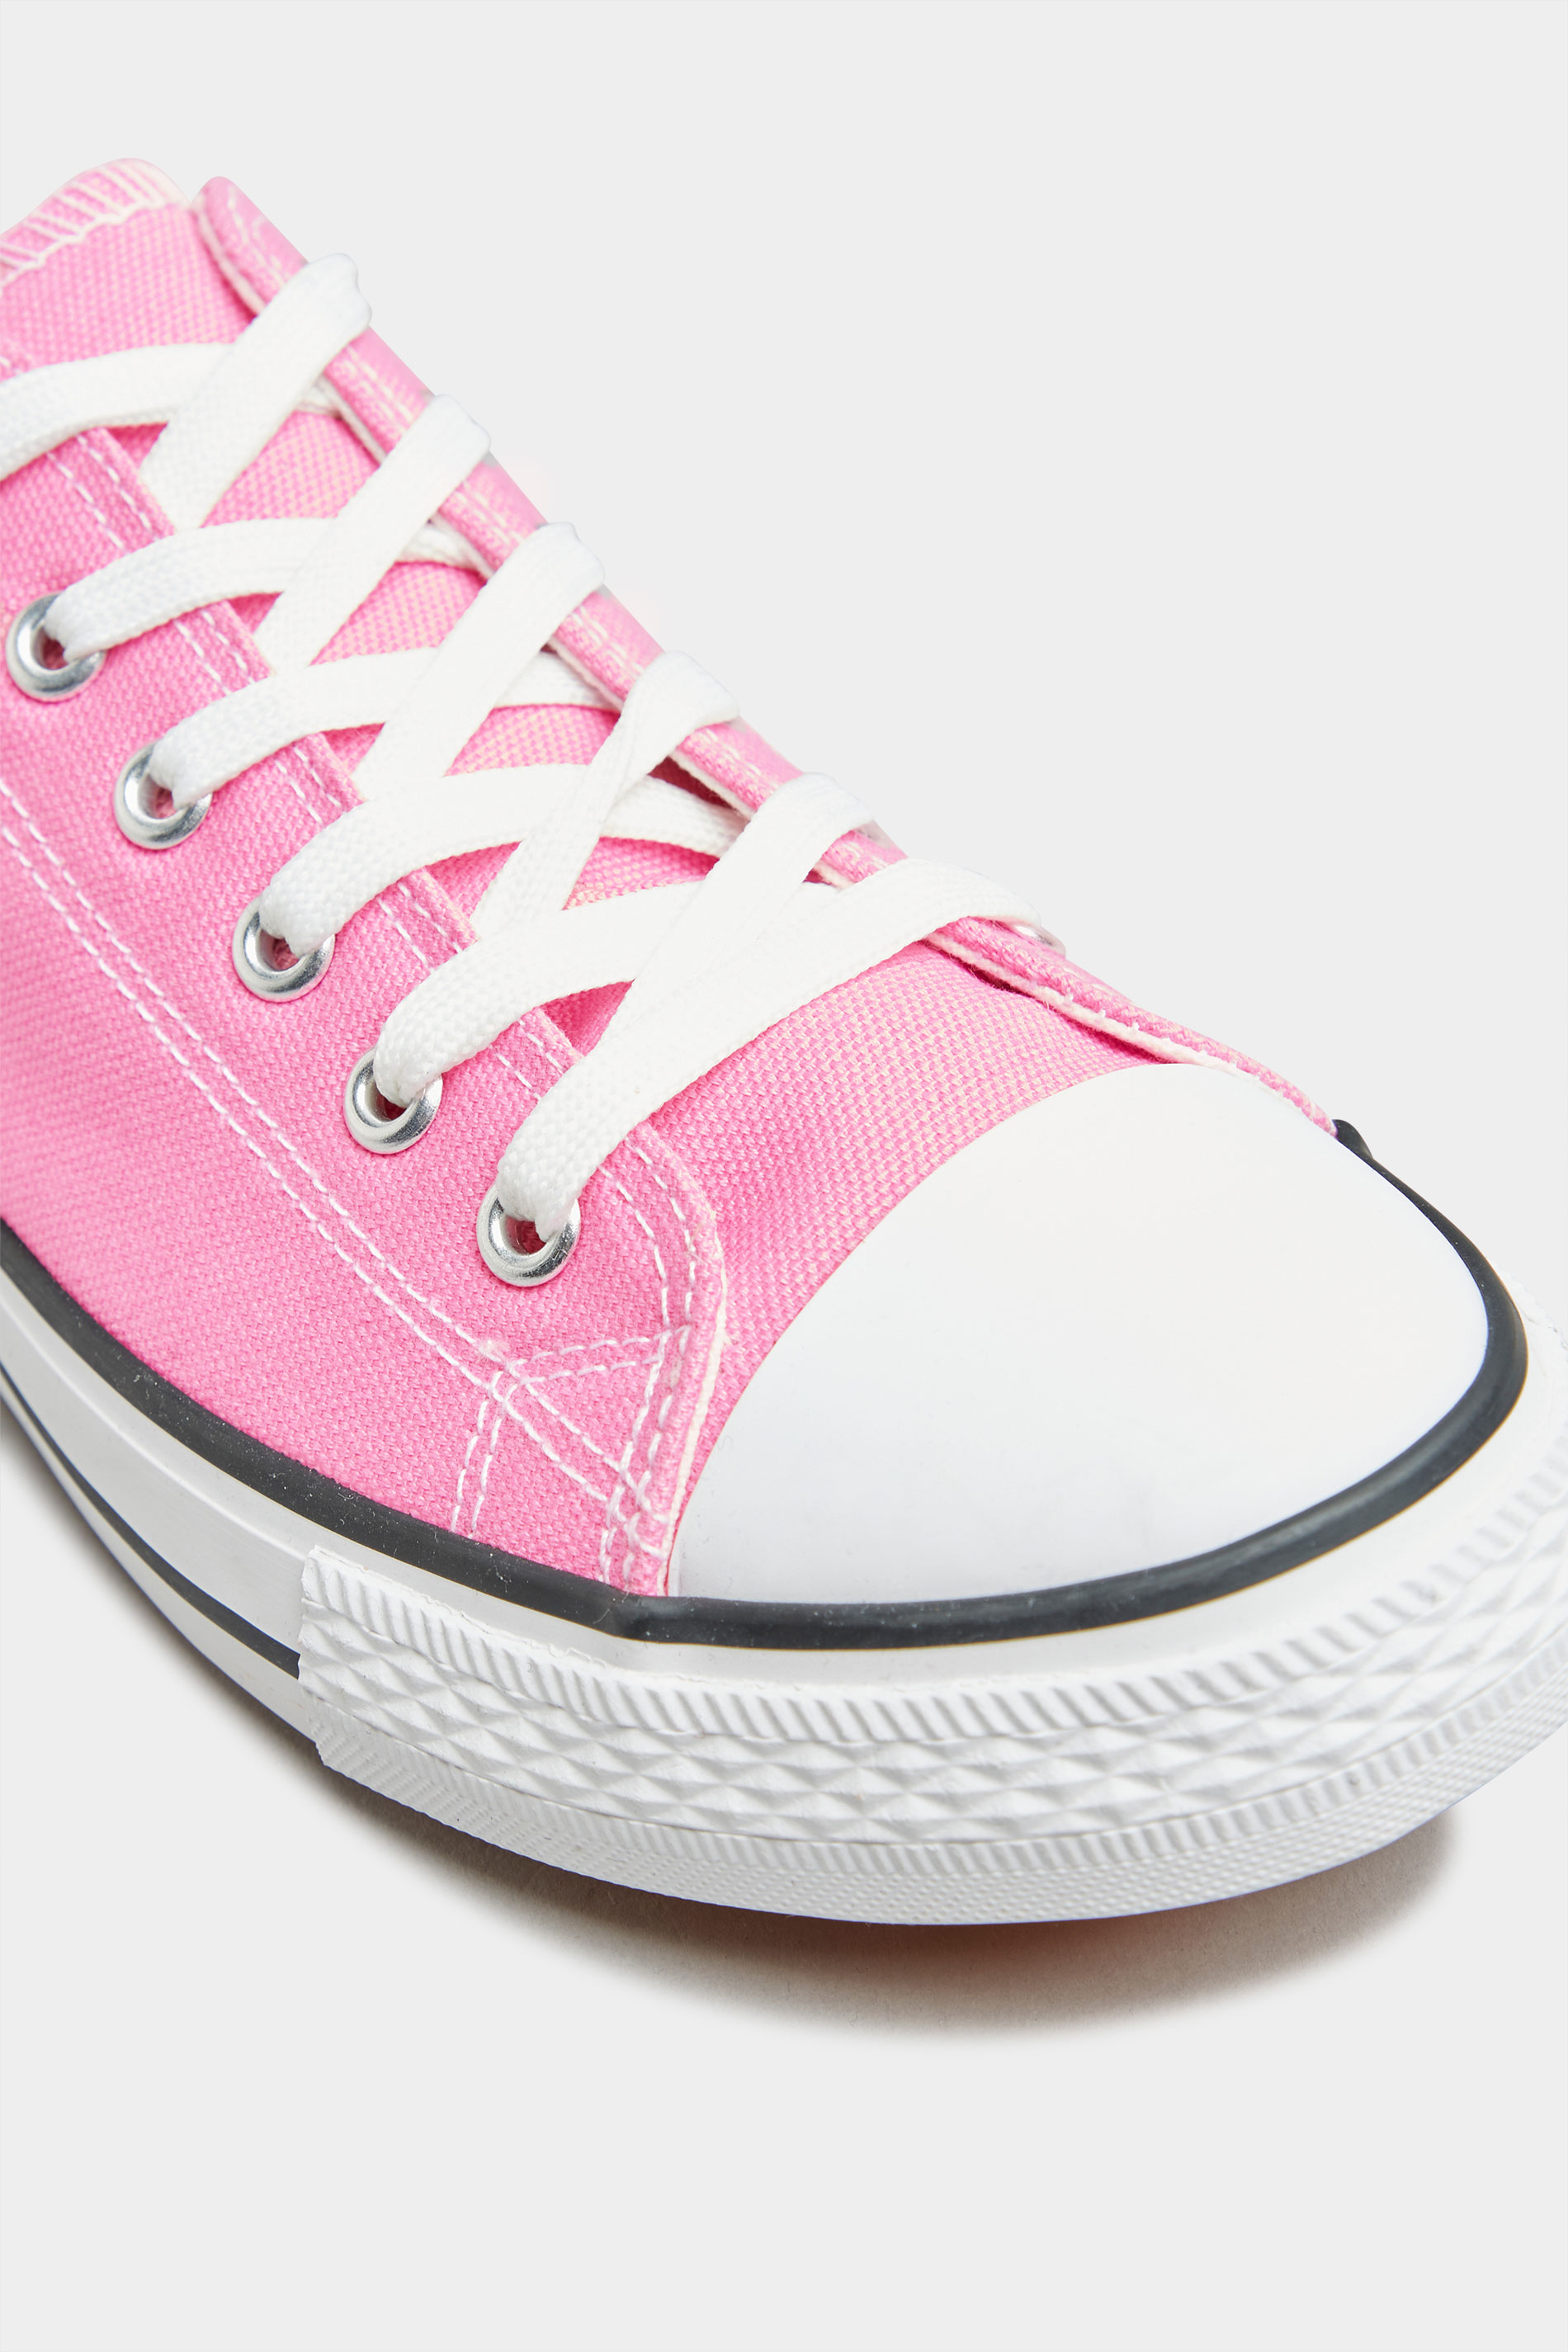 Chaussures Pieds Larges Tennis & Baskets Pieds Larges | Tennis Roses Pieds Larges - GK64851